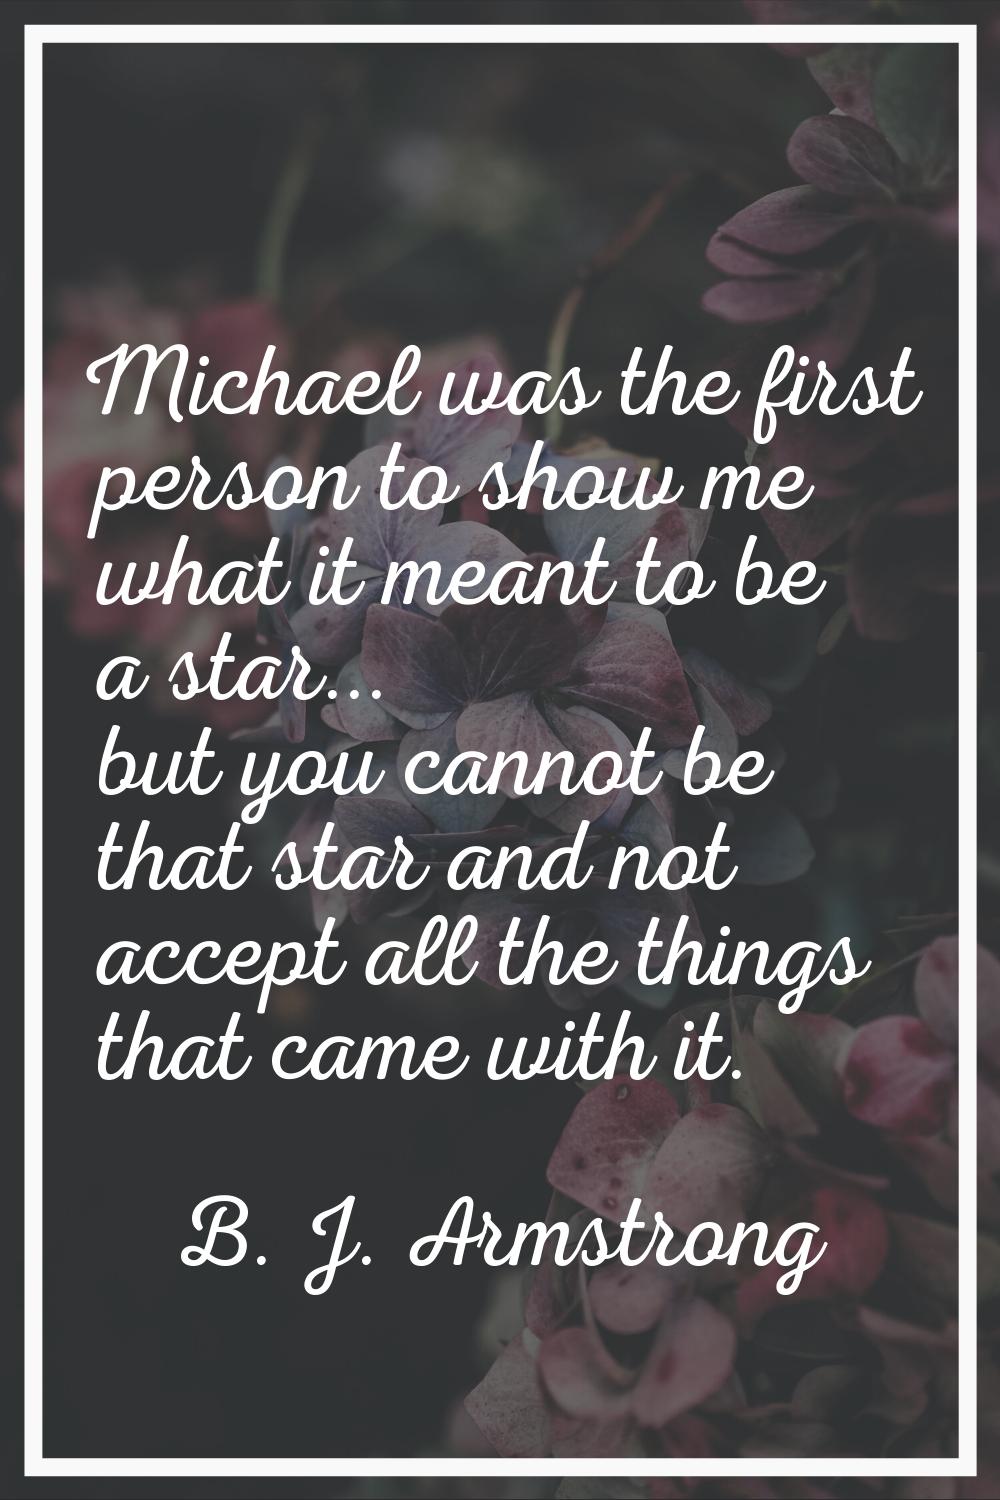 Michael was the first person to show me what it meant to be a star... but you cannot be that star a